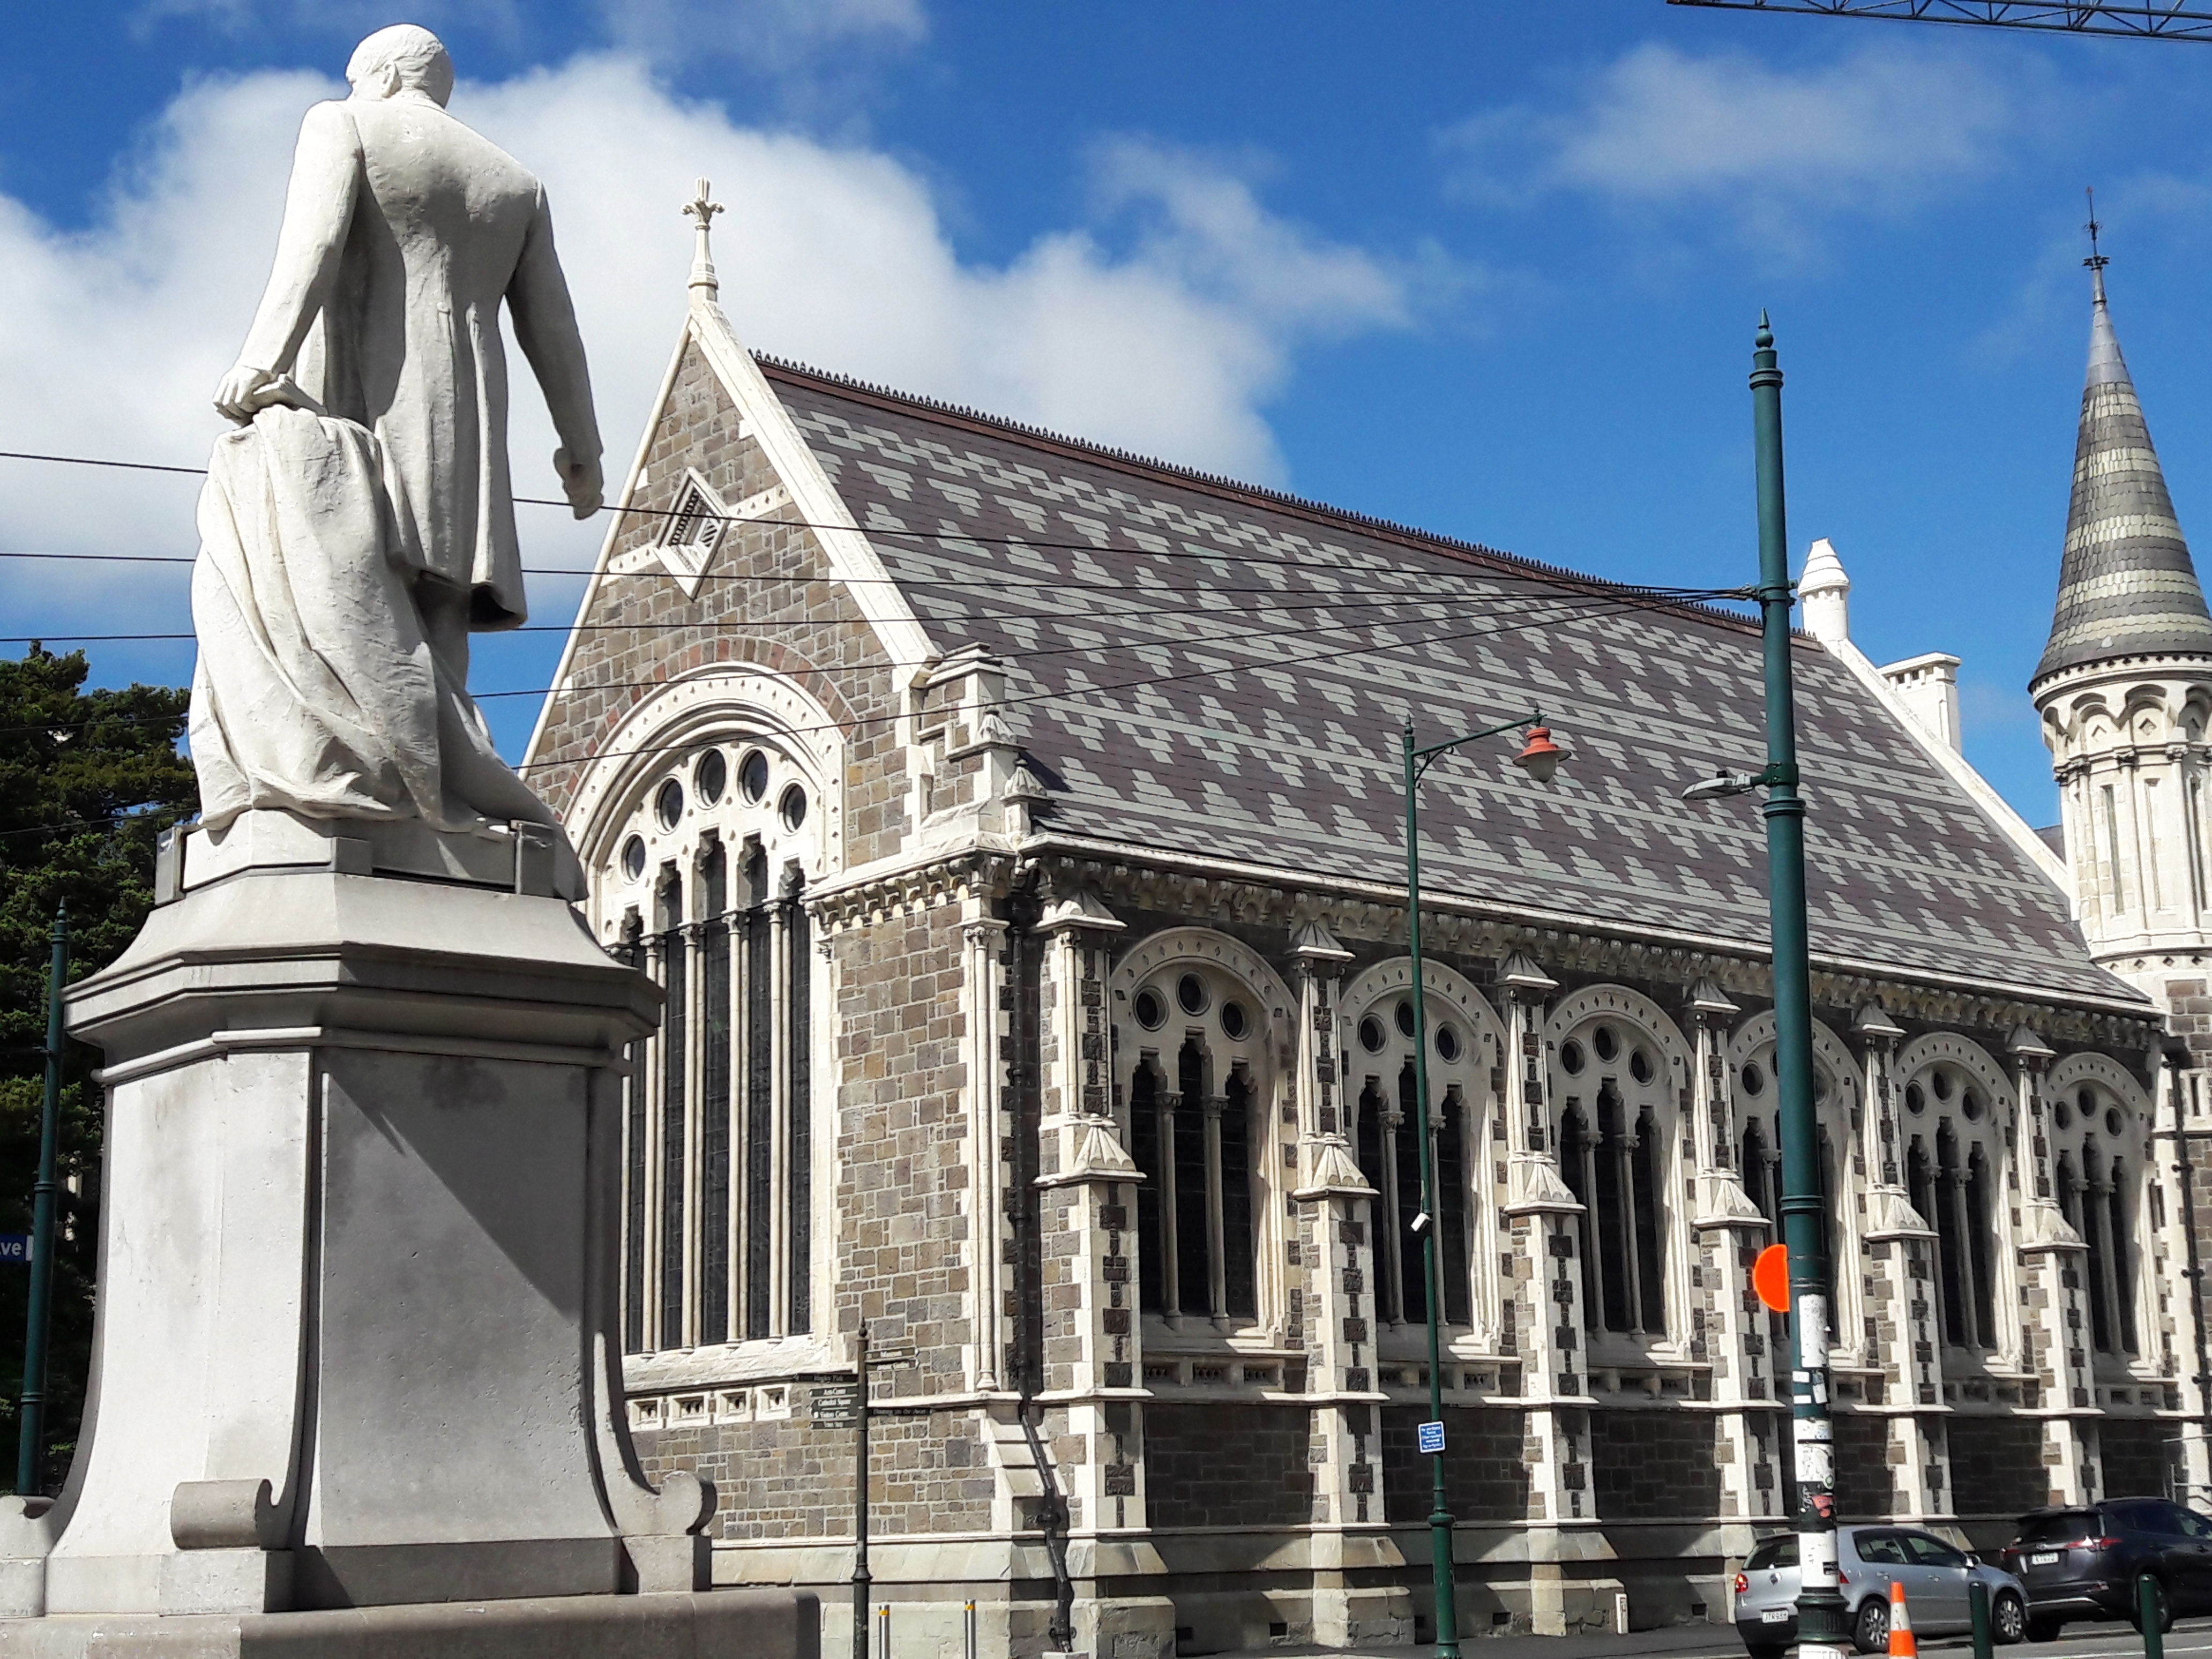 Christchurch is a traveler's delight with it's museums and cafes